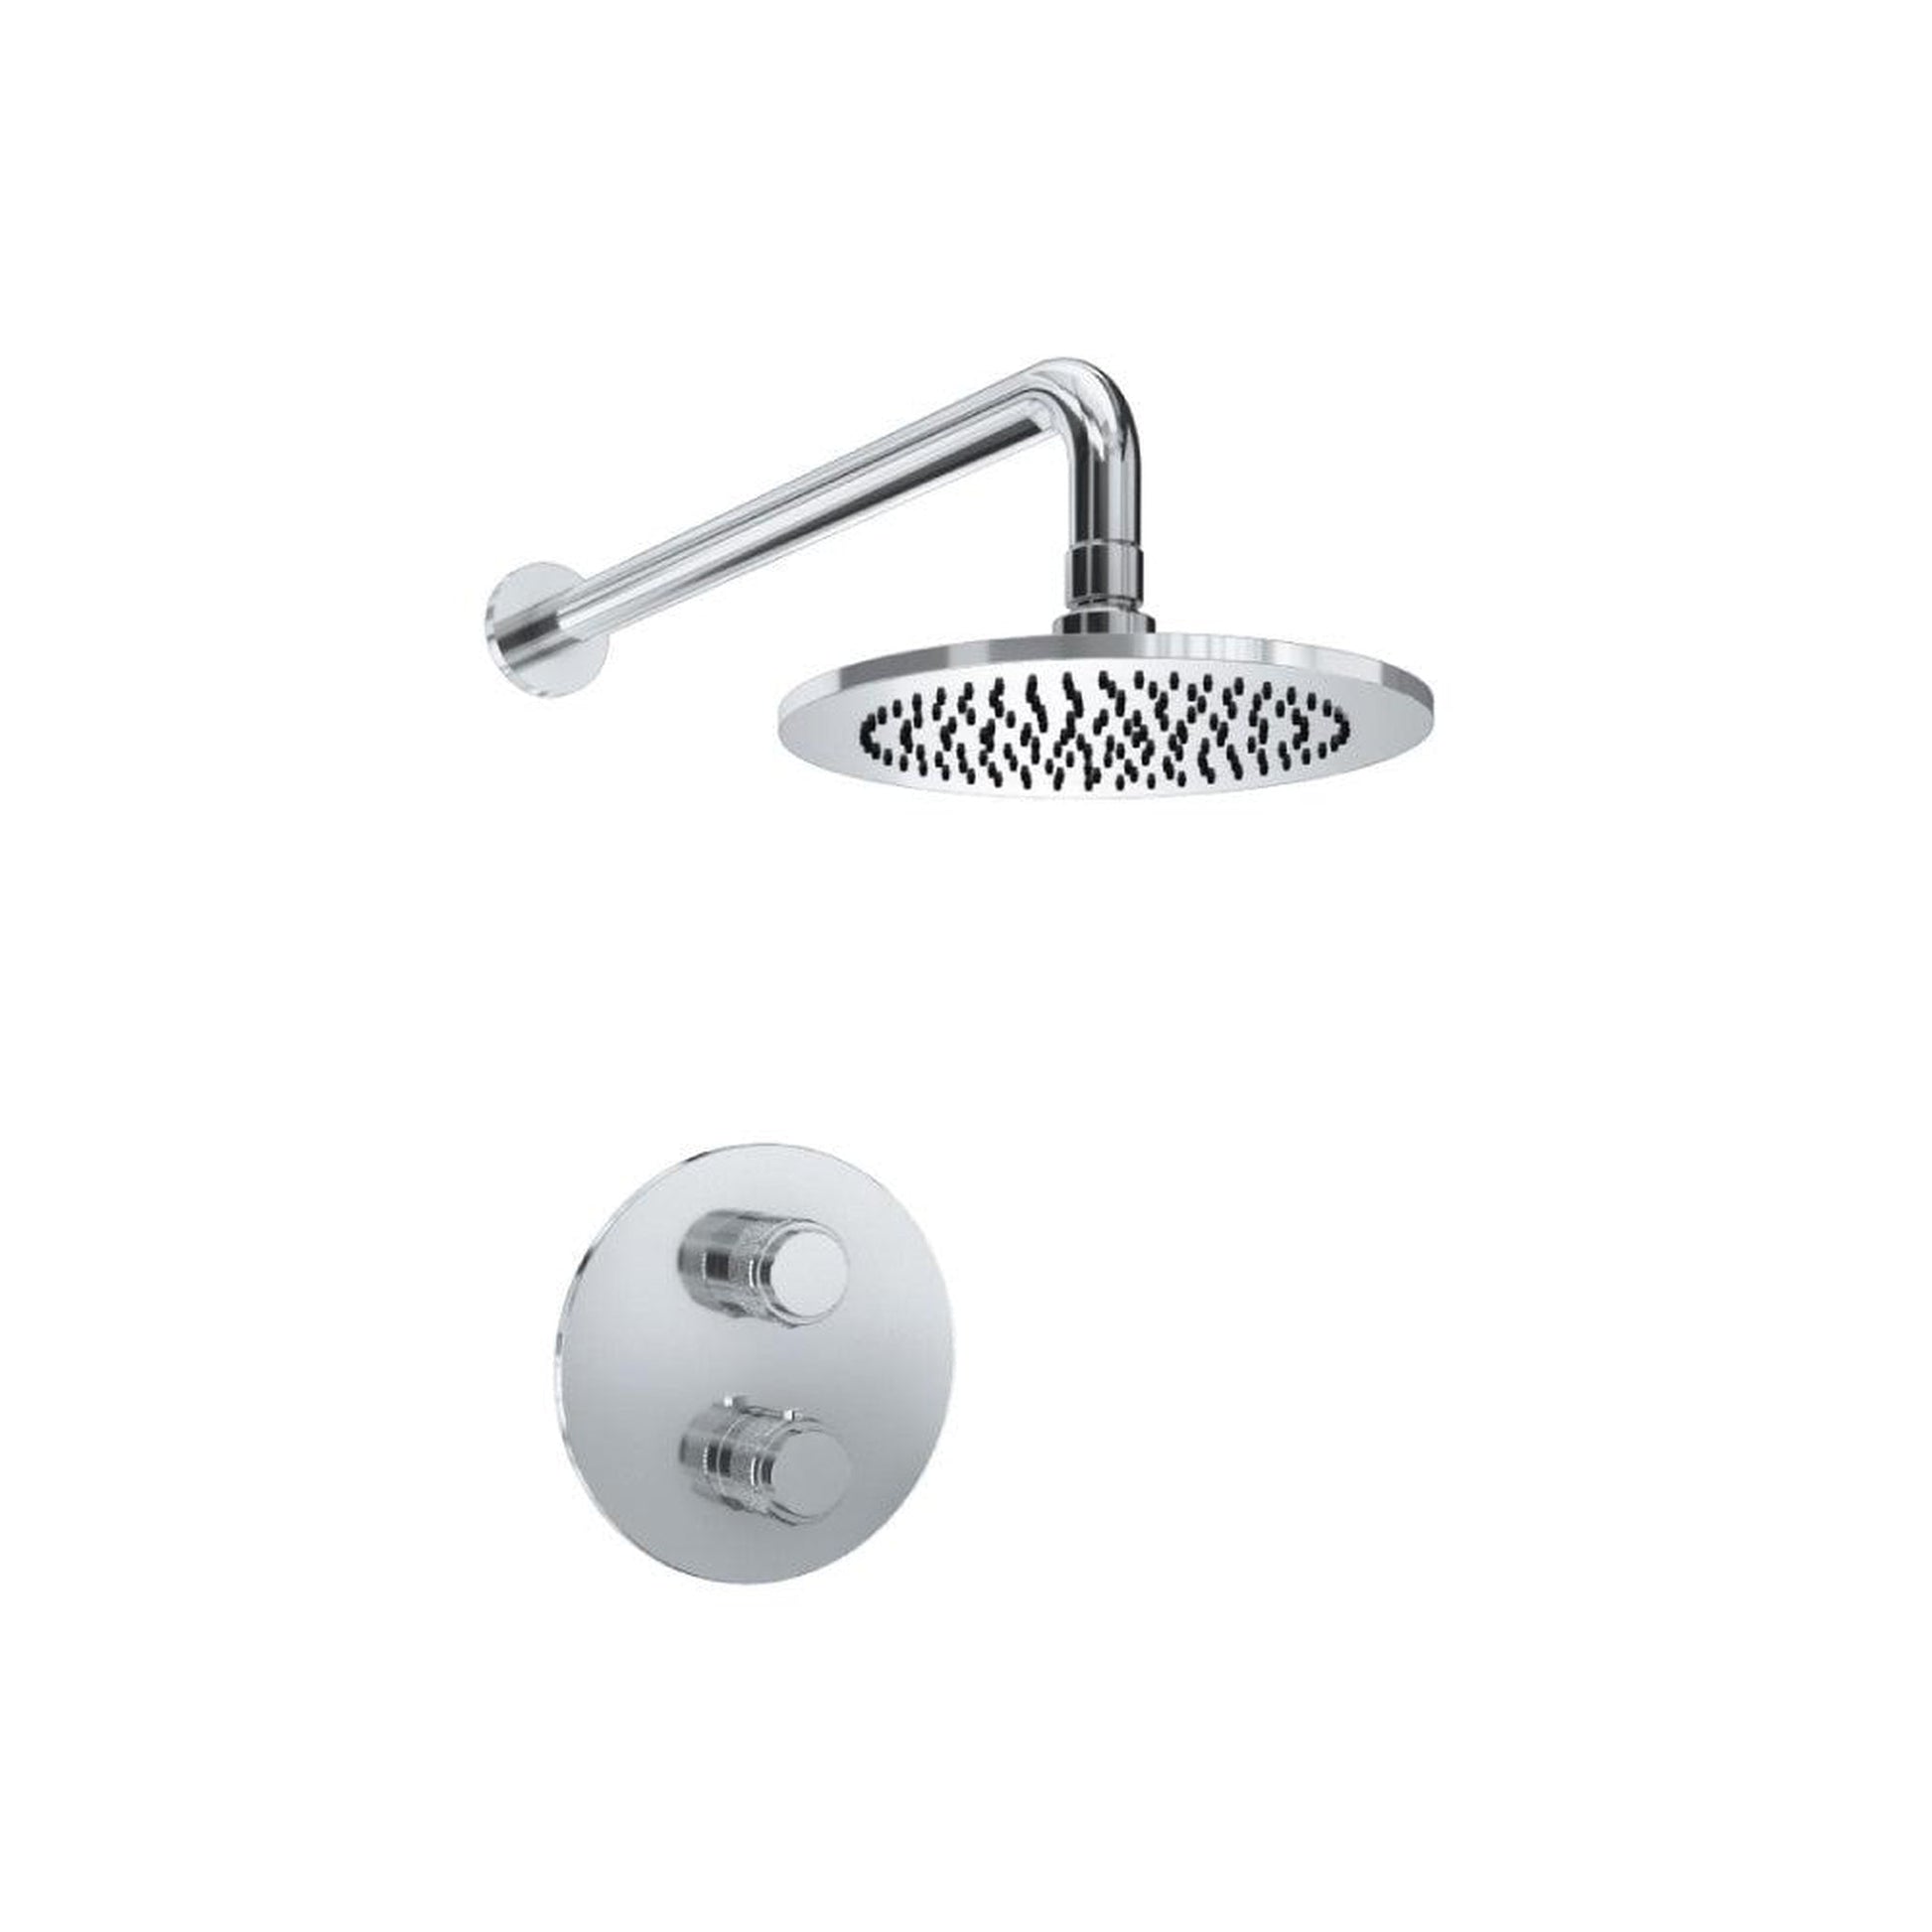 Isenberg Serie 250 Single Output Matte Black Wall-Mounted Shower Set With Single Function Round Rain Shower Head, Two-Handle Shower Trim and 1-Output Wall-Mounted Thermostatic Shower Valve With Integrated Volume Control